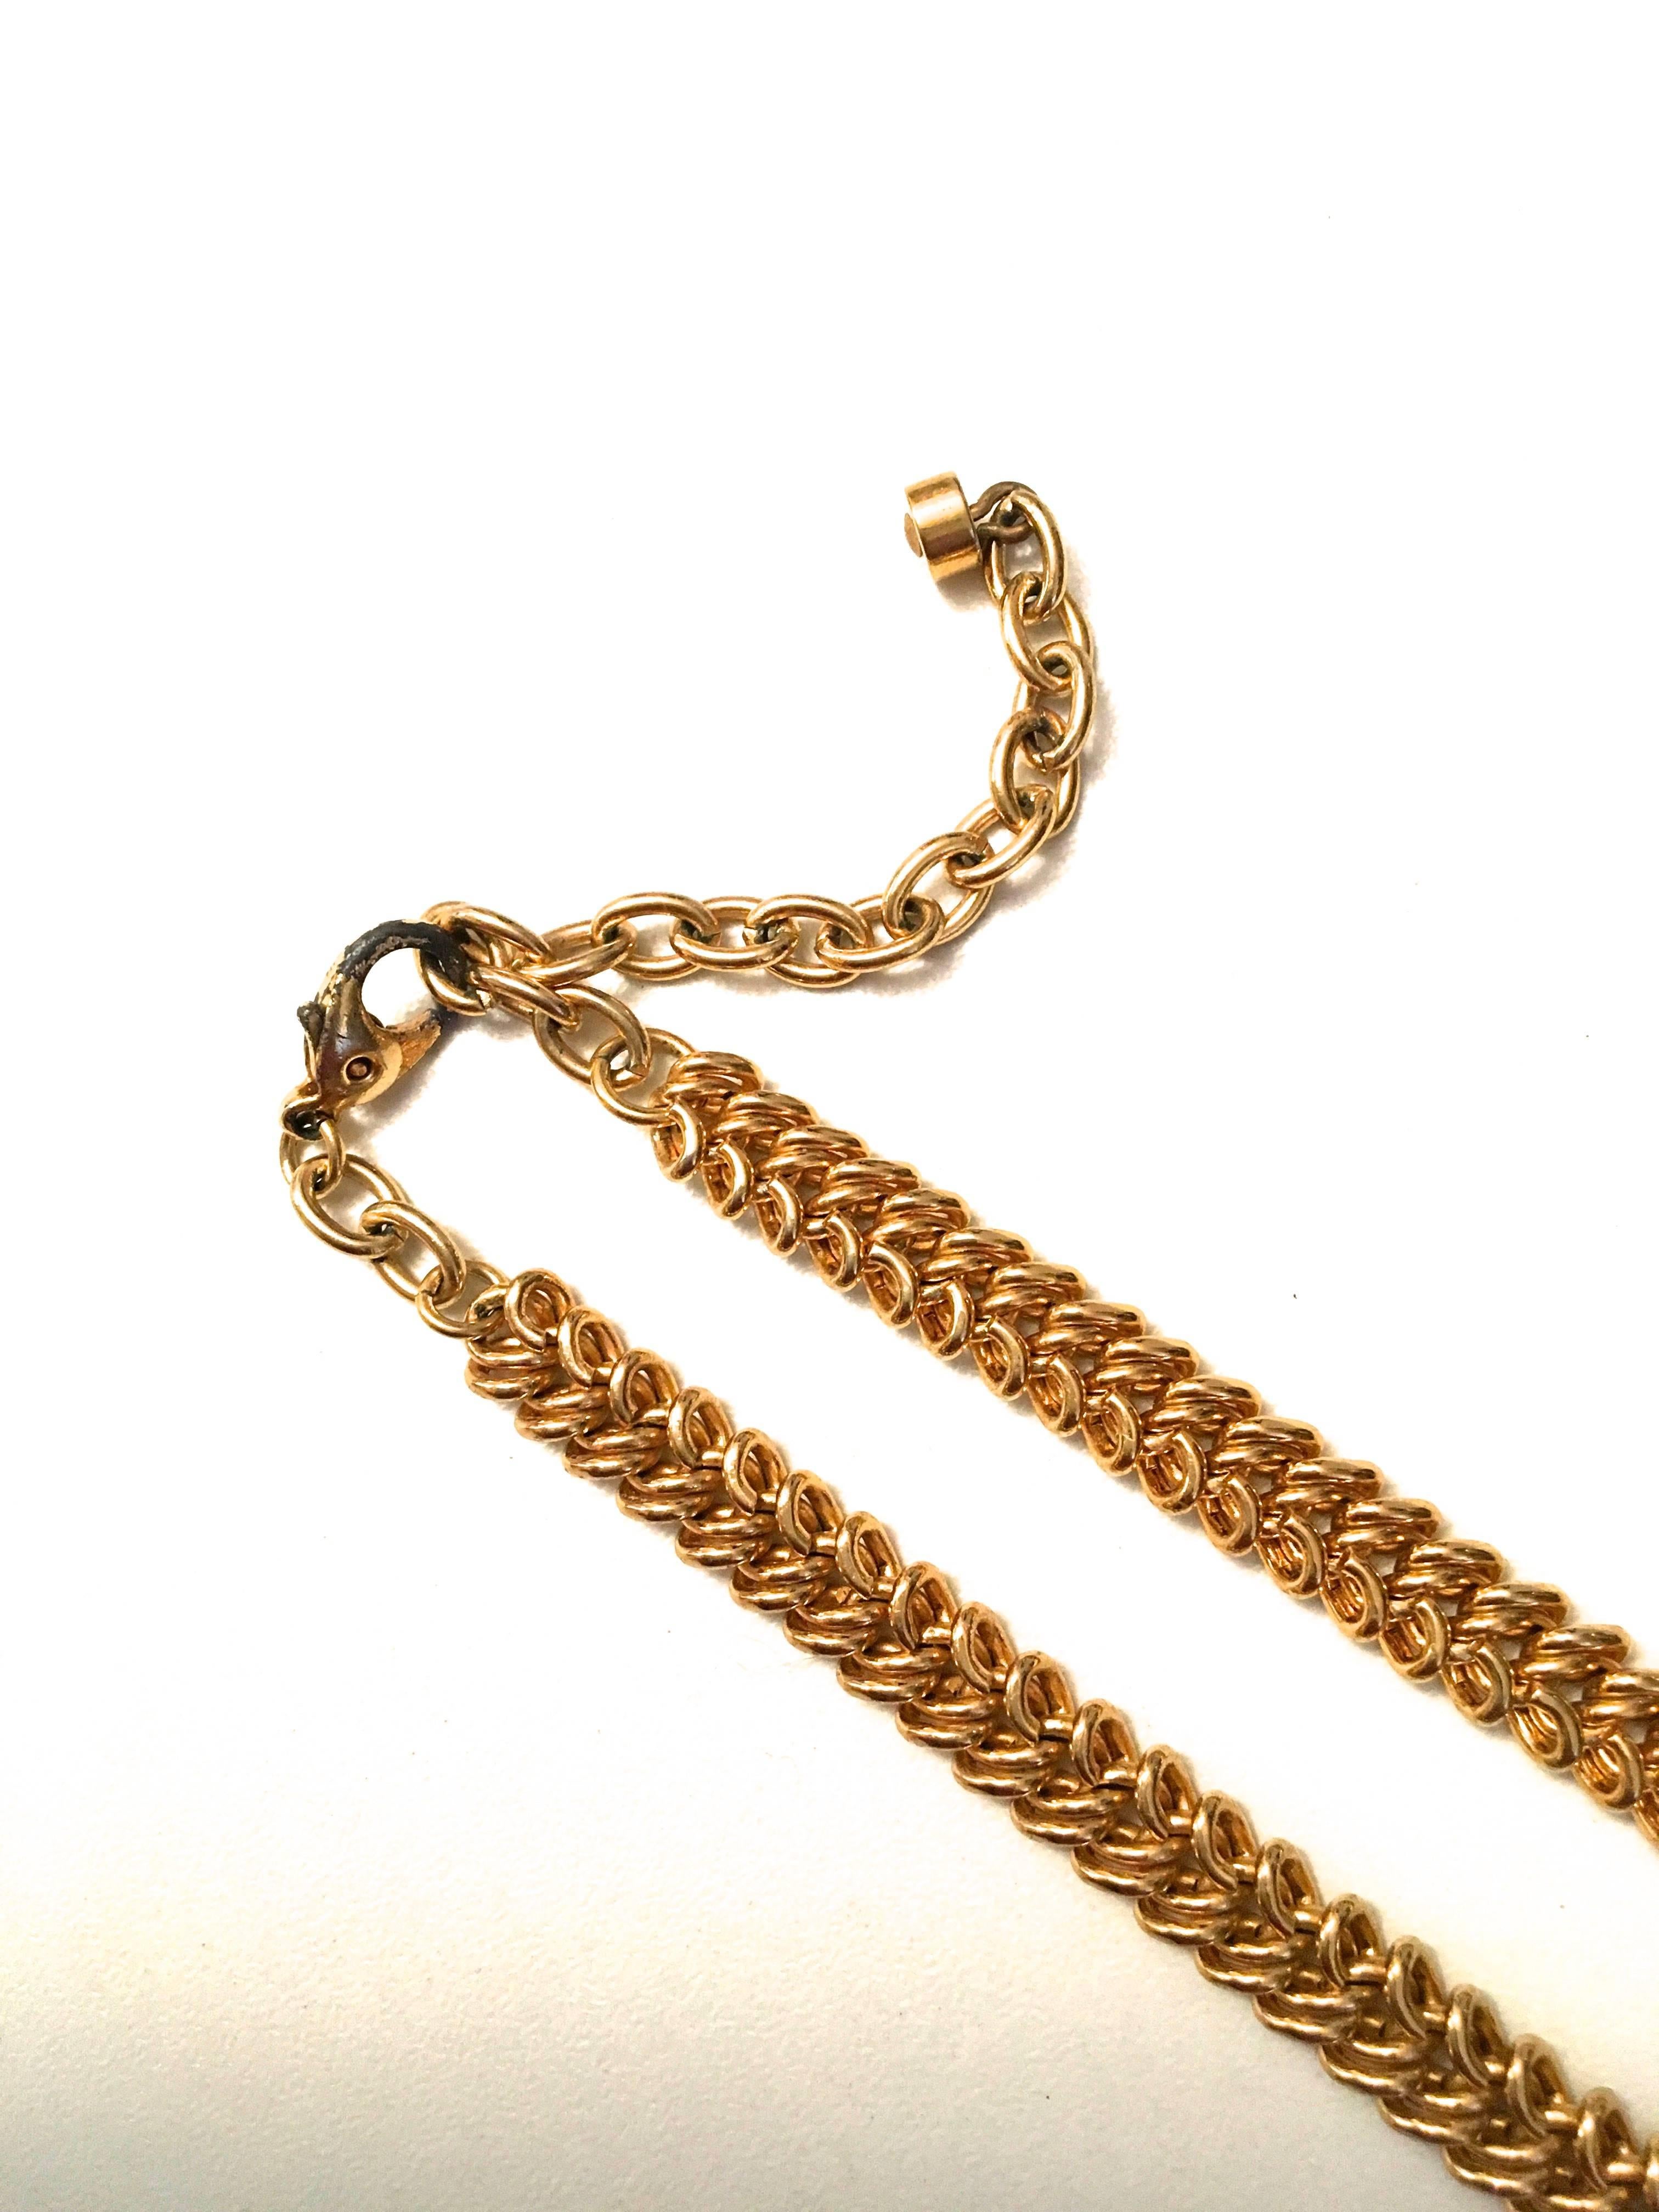 Presented here is a beautiful vintage necklace from Balenciaga. The necklace is comprised of a beautifully crafted gold tone metal chain. The sturdy chain holds a stunningly beautiful pendant at the front of the necklace. The pendant is an octagonal